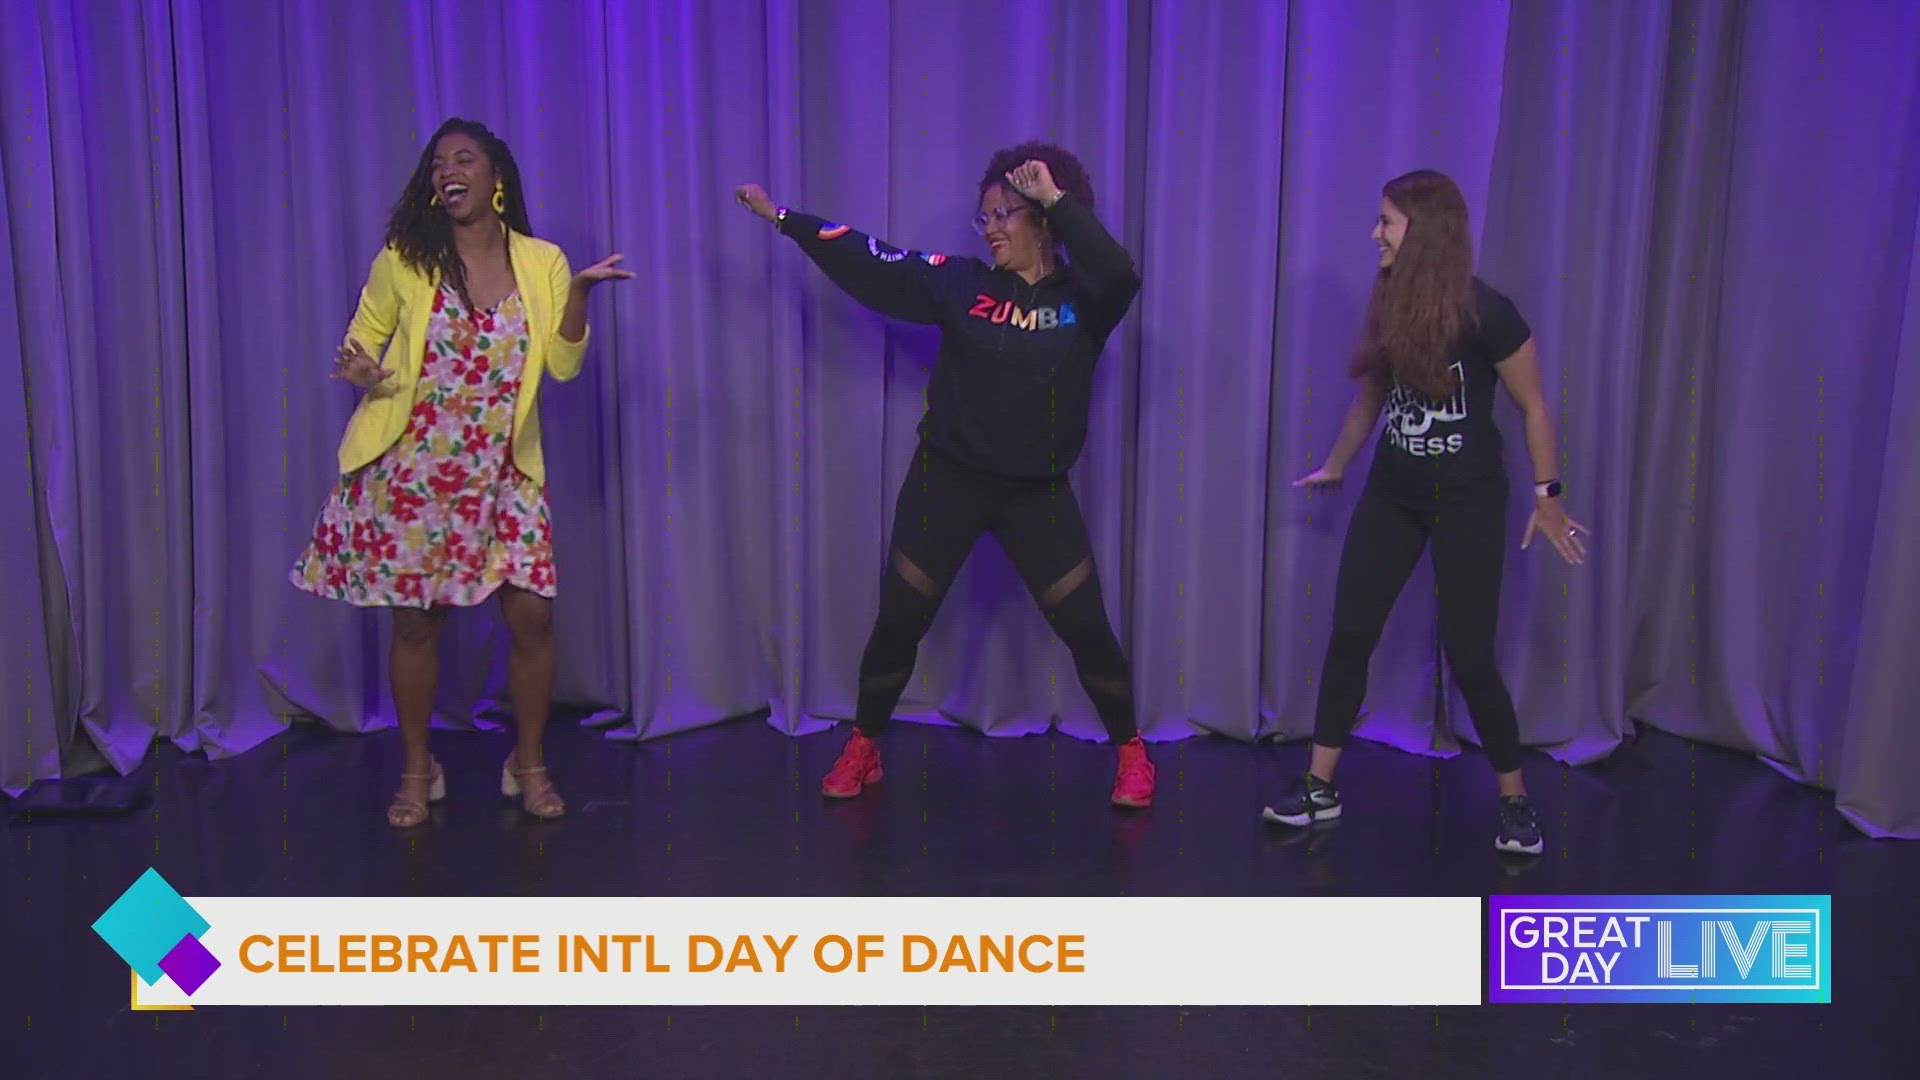 Alyssa and Khadijah from Crunch Fitness show us some Zumba moves ahead of International Day of Dance!